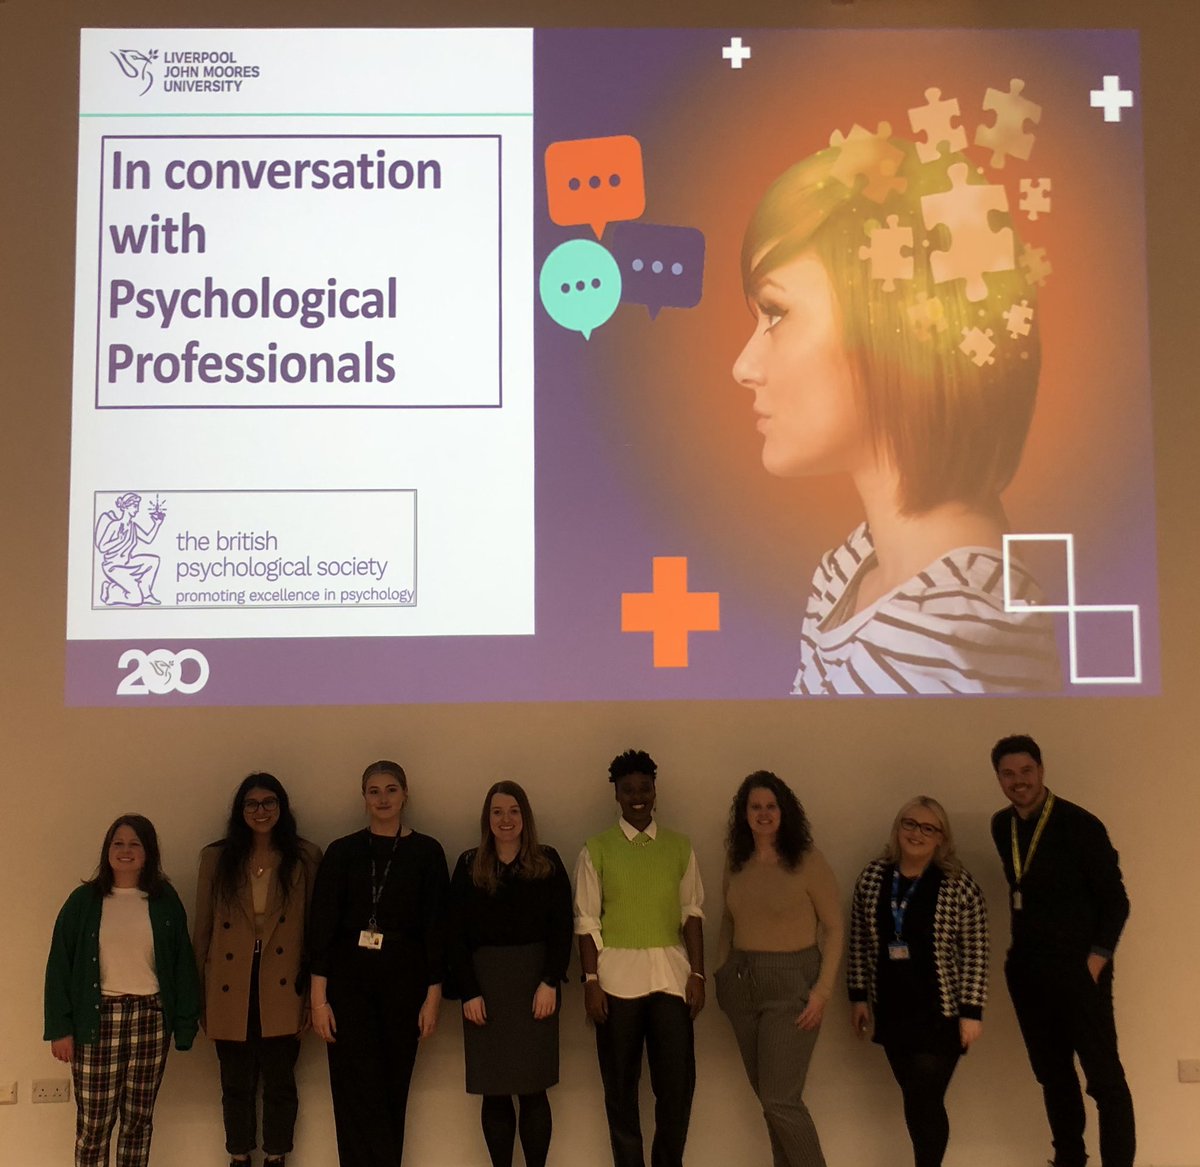 Thanks to all the speakers sharing their insights & career journeys from a wide range of psychological professional perspectives. Great talks inspiring LJMU students on their future career pathways at the BPS Careers Festival Local Stage in Liverpool! @LJMUPsychology @KerenConey